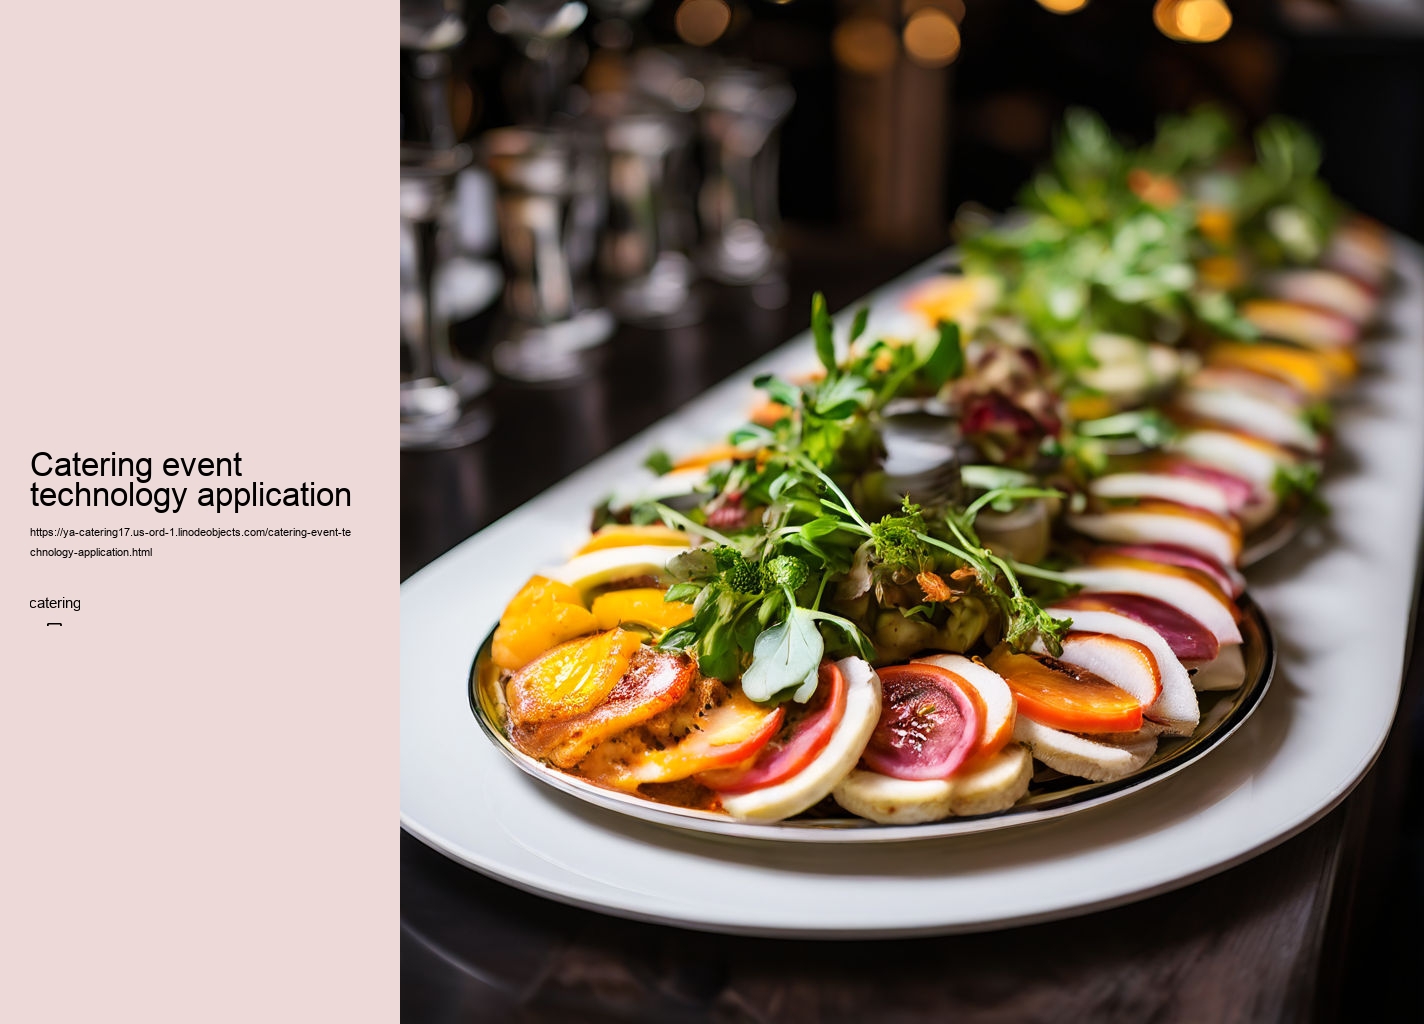 Catering event technology application